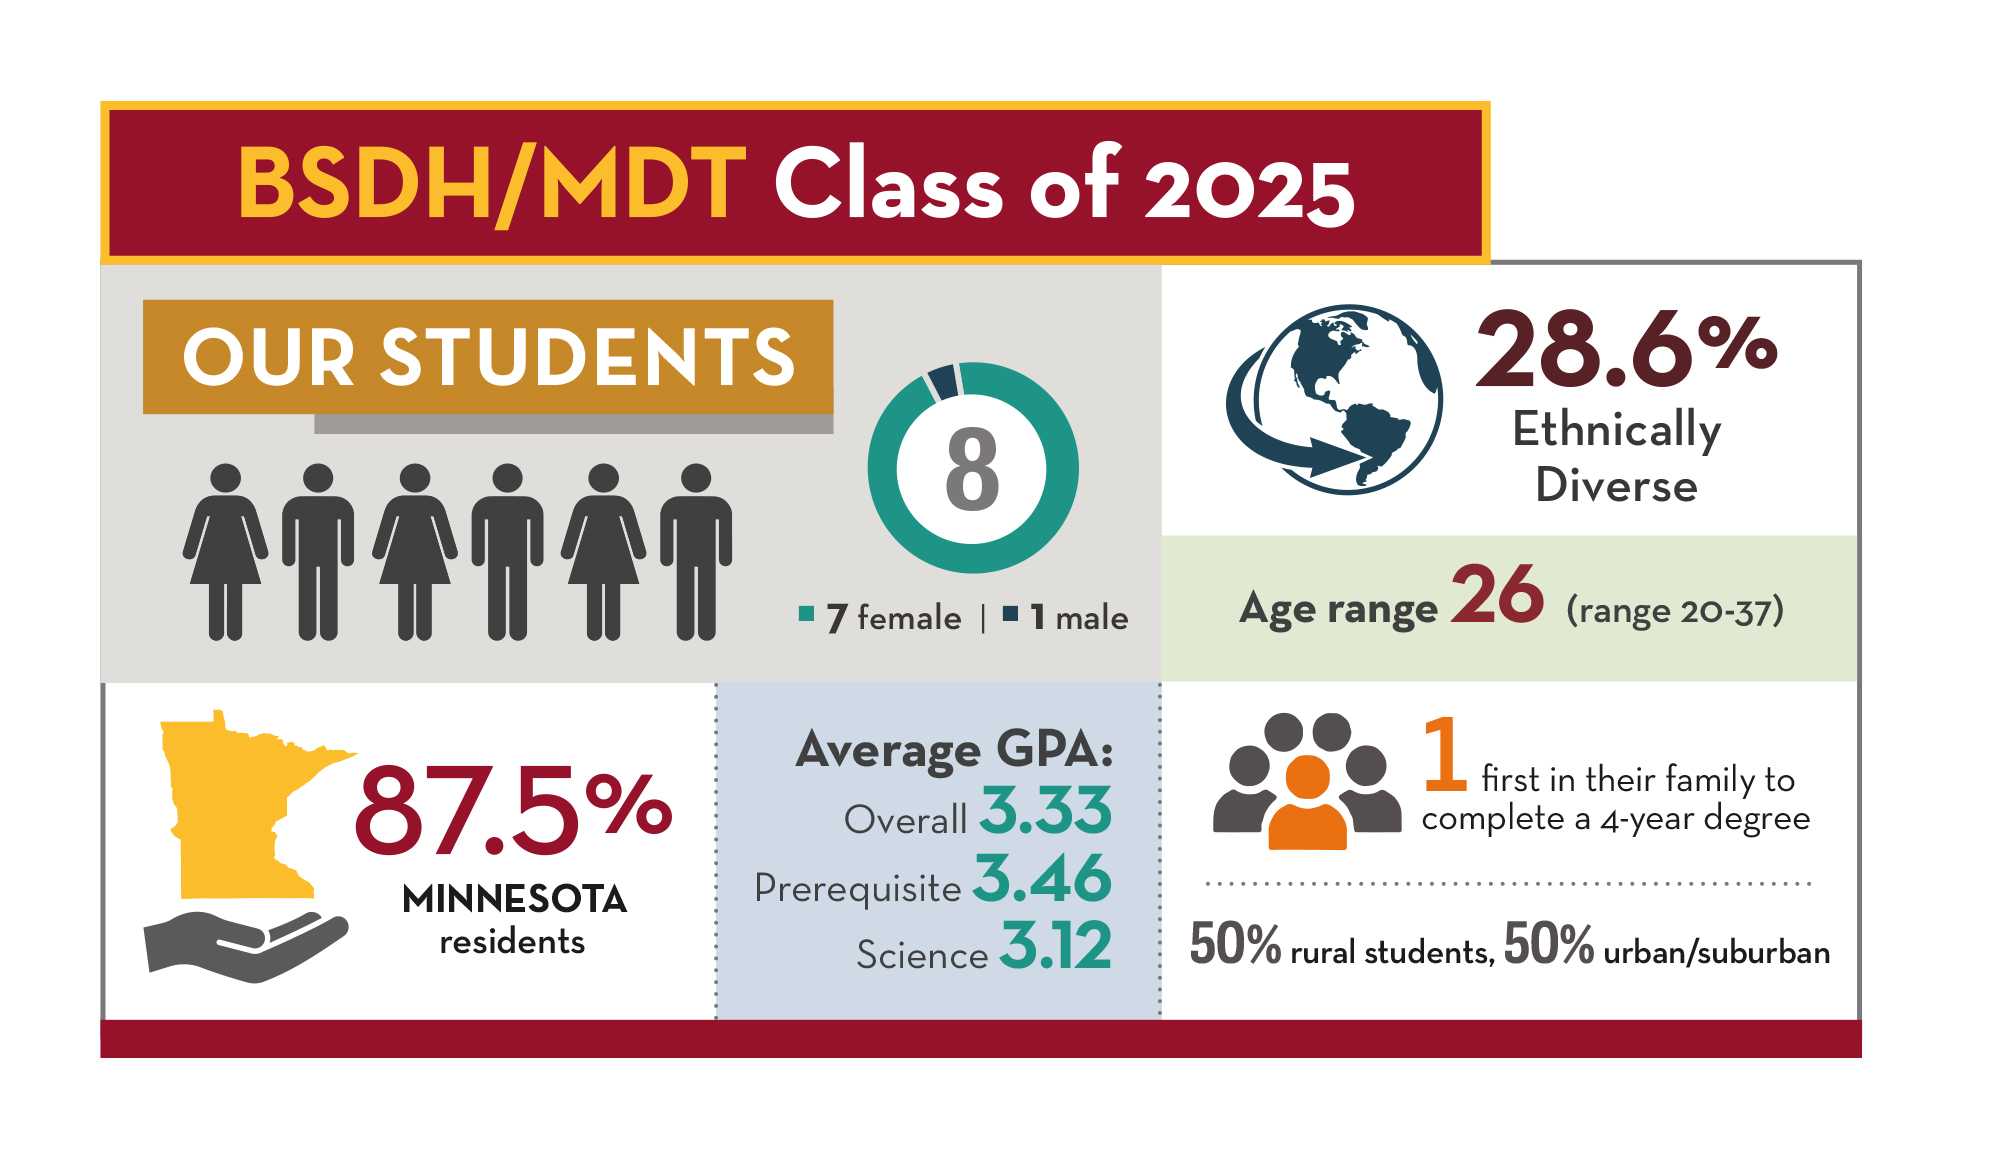 BSDH/MDT Class of 2025 - 8 students, 7 female, 1 male. 28.6% ethnically diverse, average age 26, 87.5% minnesota residents, 3.33 average GPA, 50% rural